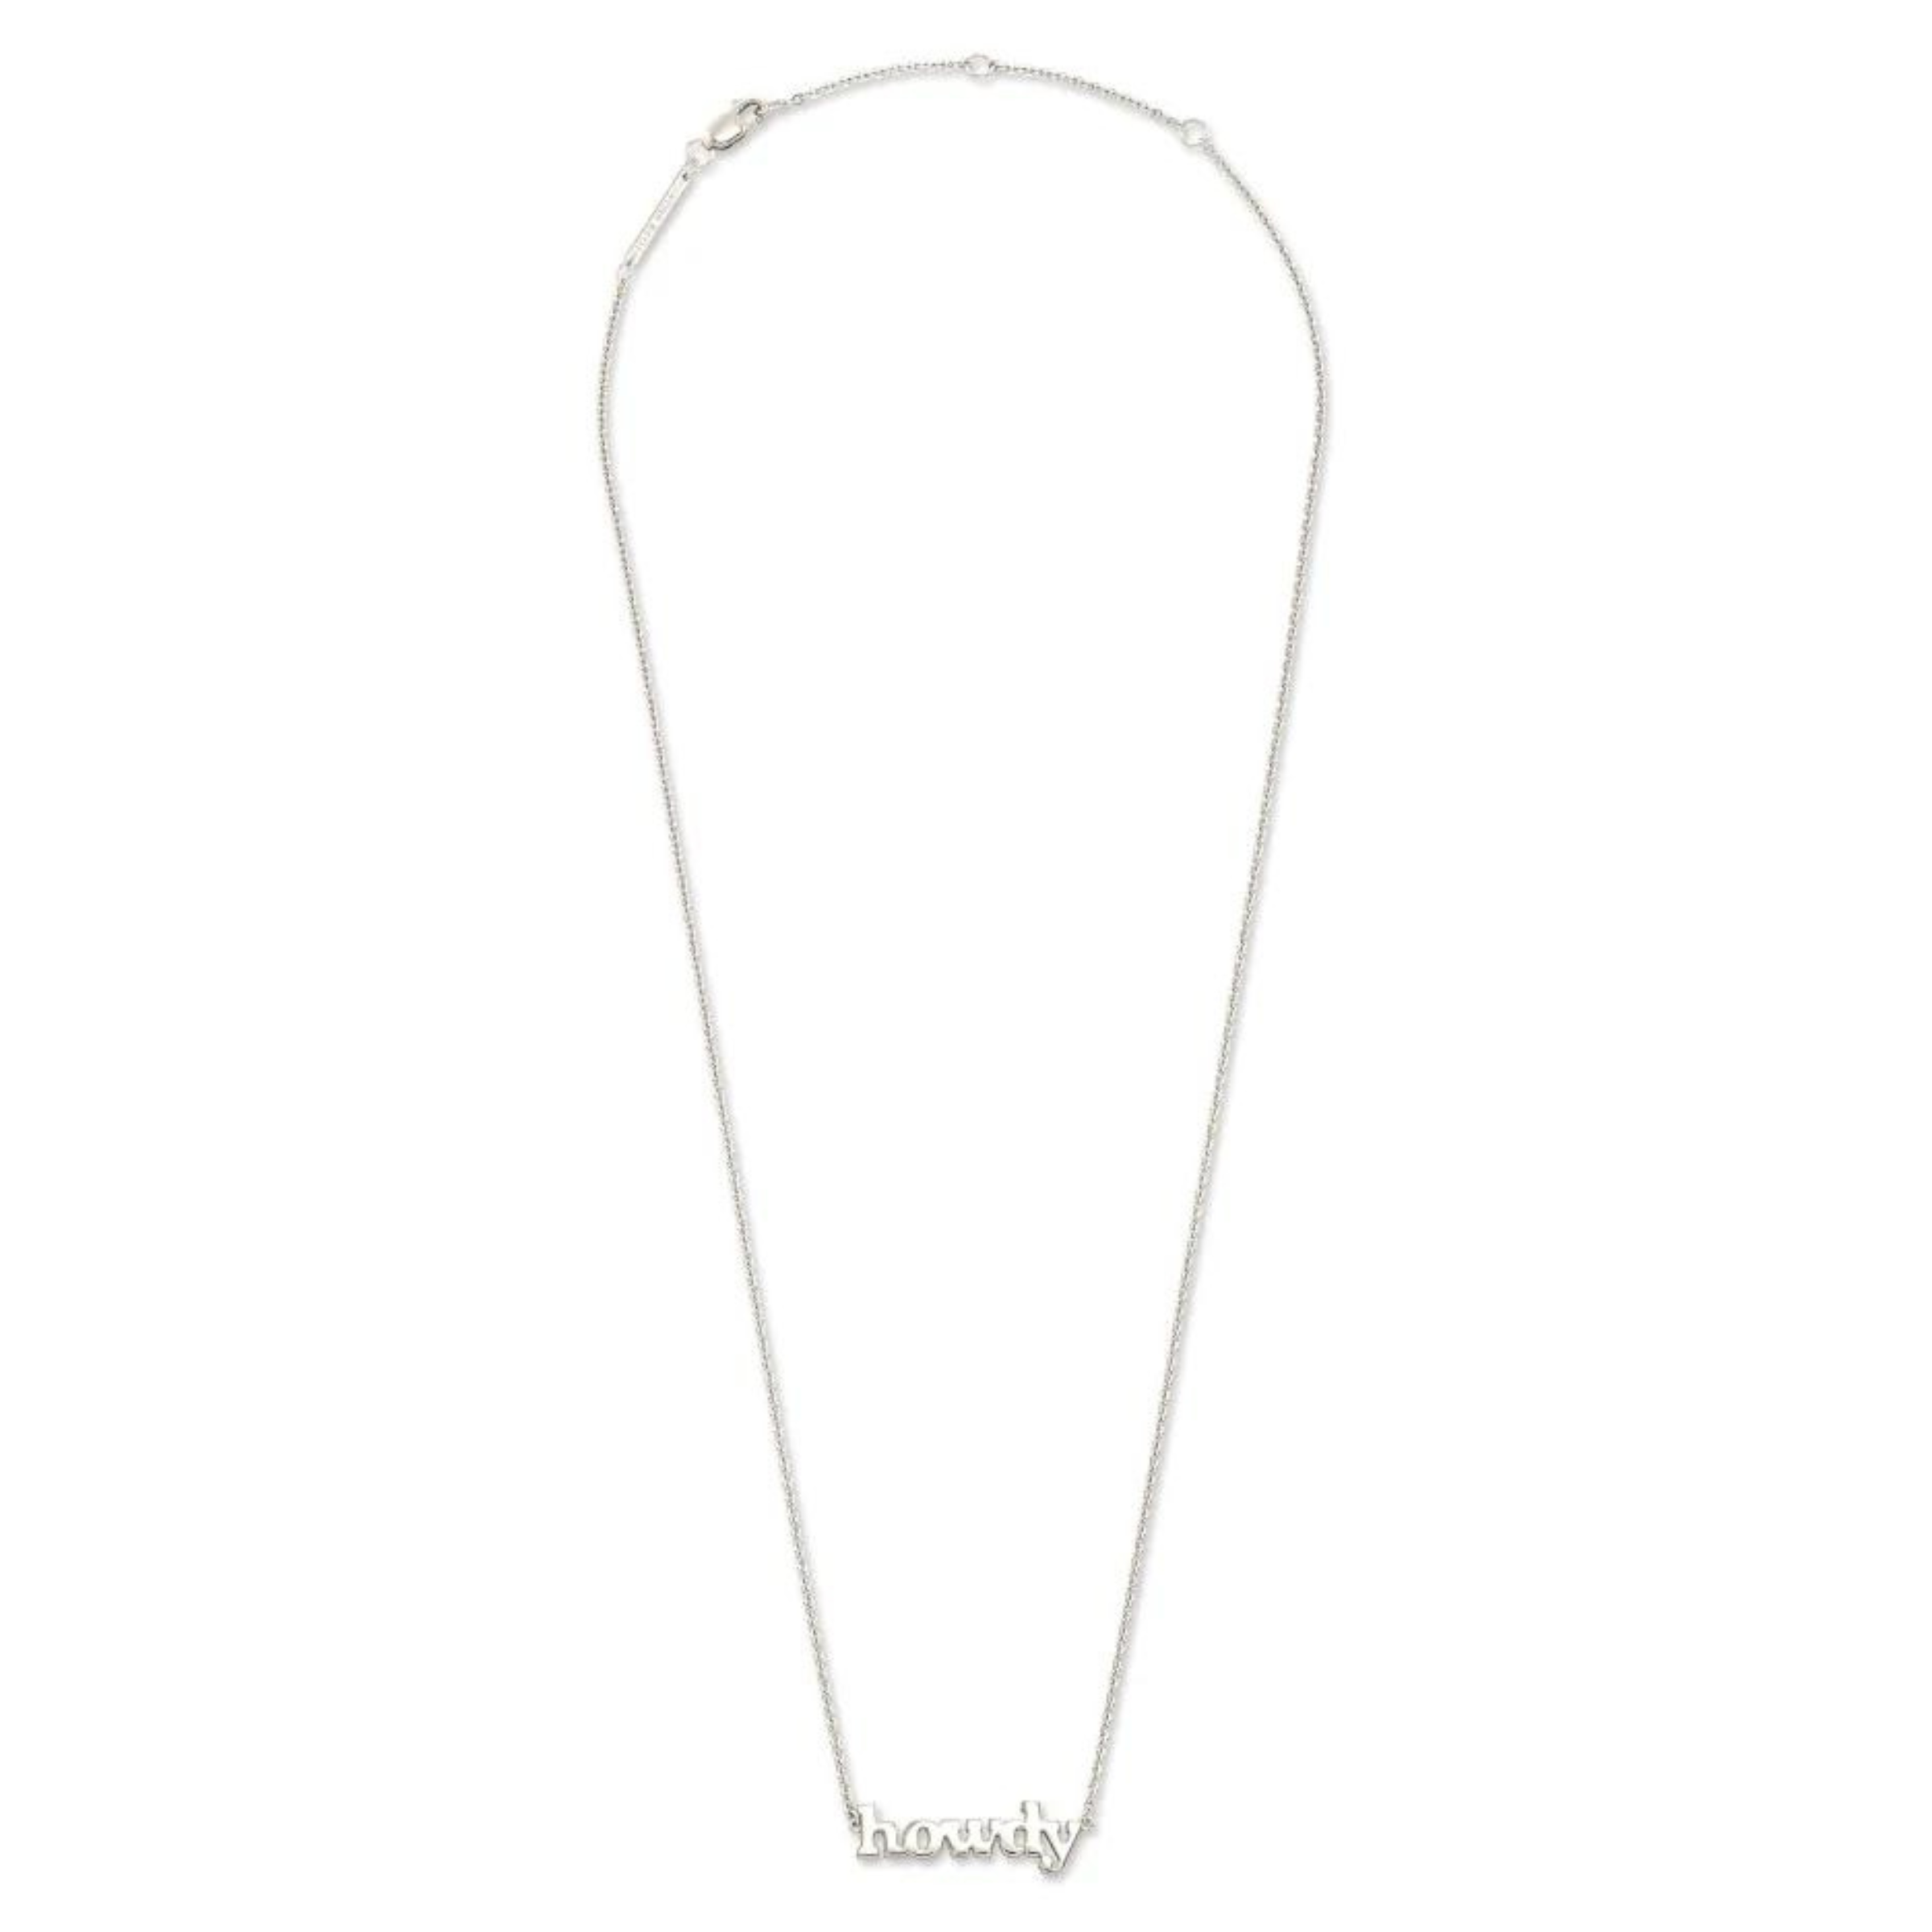 Kendra Scott | Howdy Pendant Necklace in Sterling Silver - Giddy Up Glamour Boutique